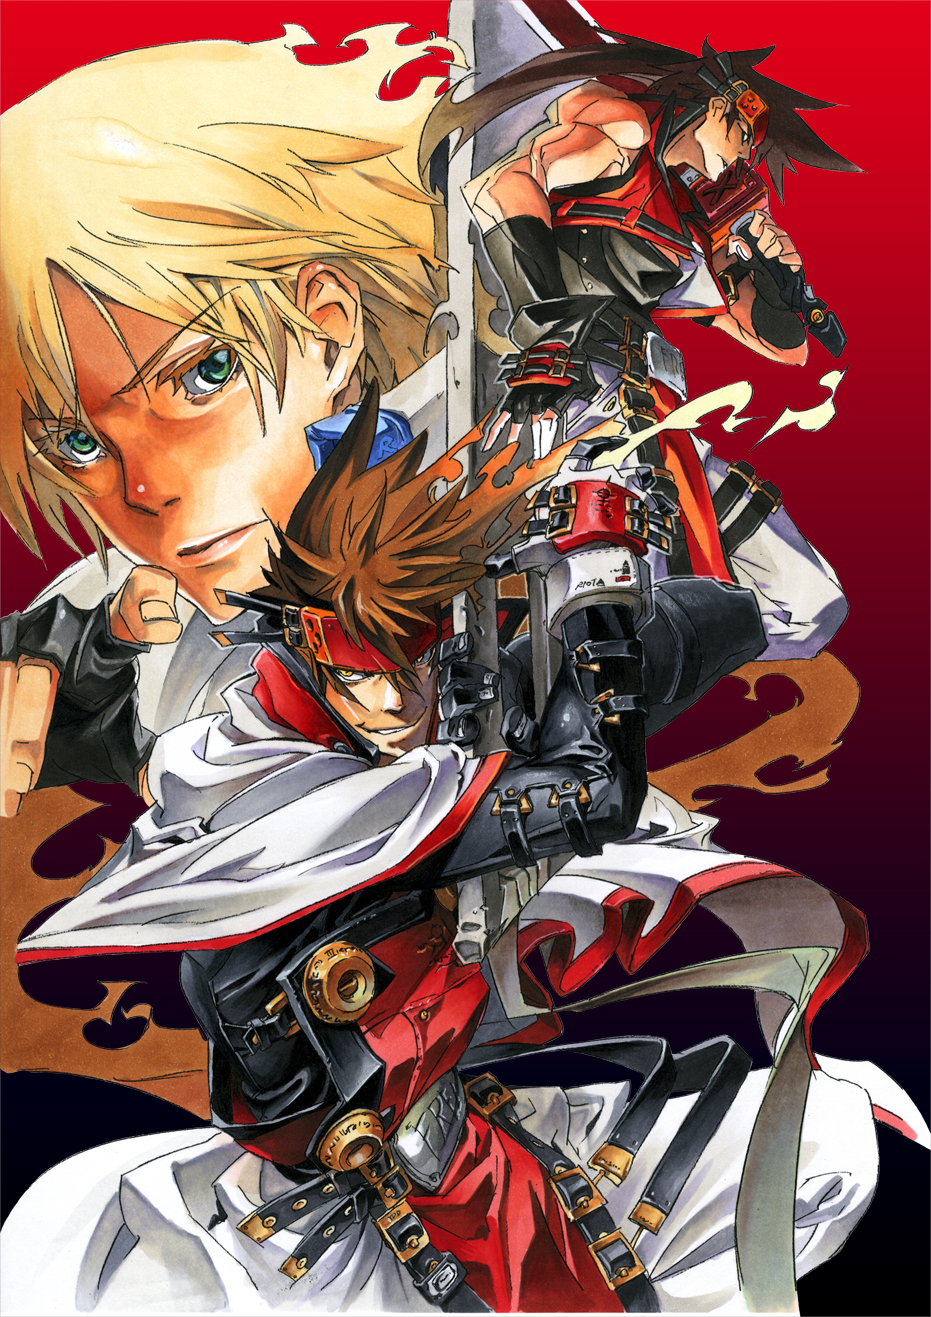 Guilty Gear Xx Lcore Plus R がnintendo Switchで配信決定 Game Watch